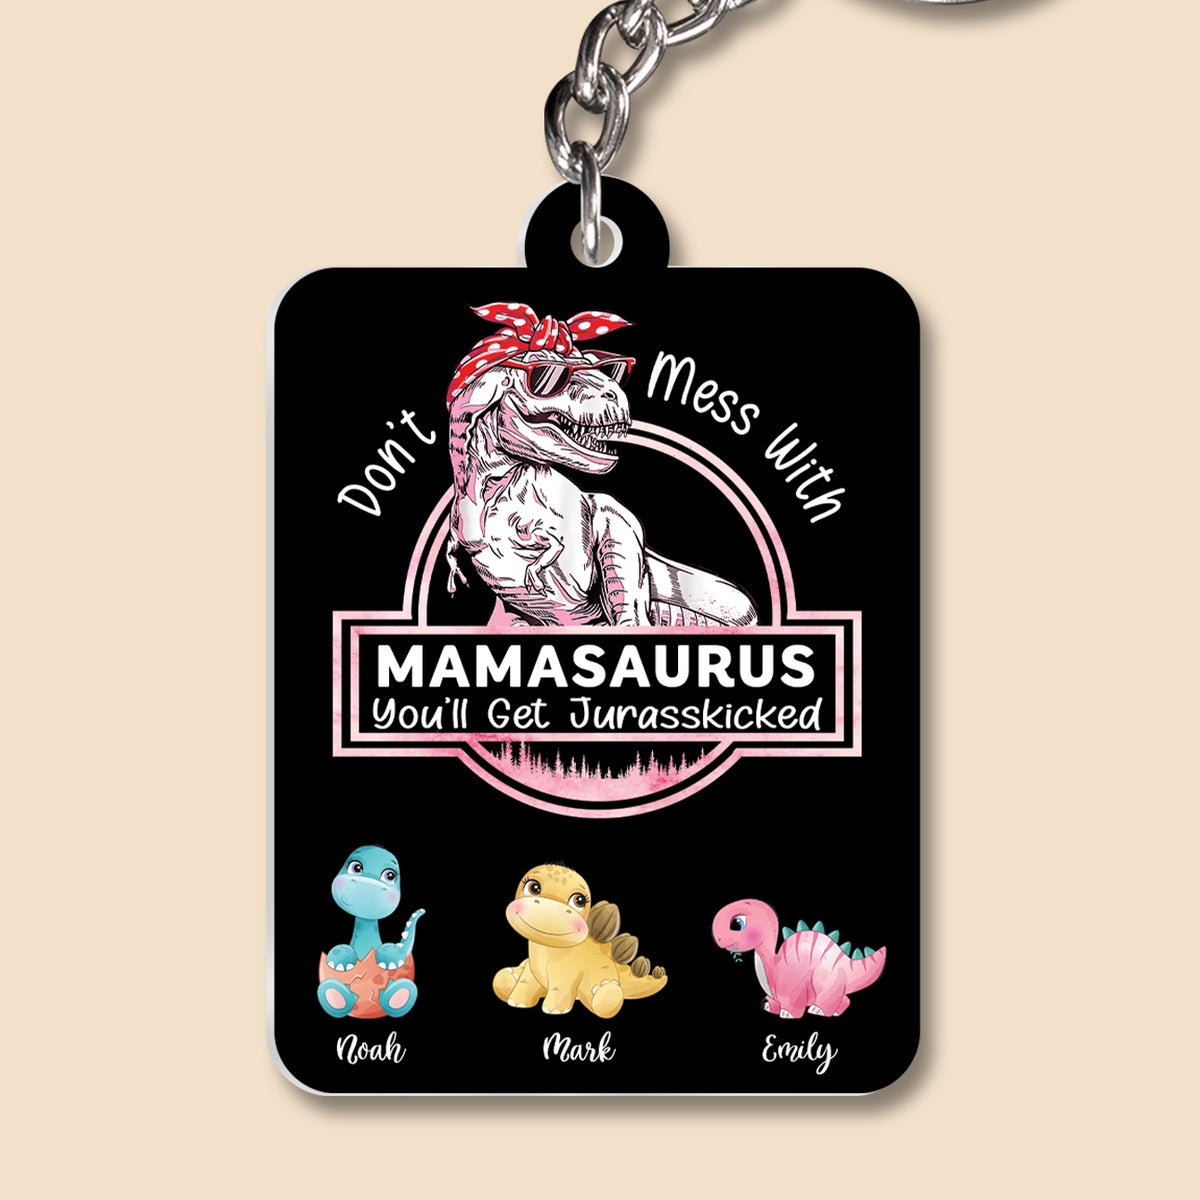 Personalized Acrylic Keychain - Don't Mess With Mamasaurus, You'll Get Jurasskicked (Ver 2)